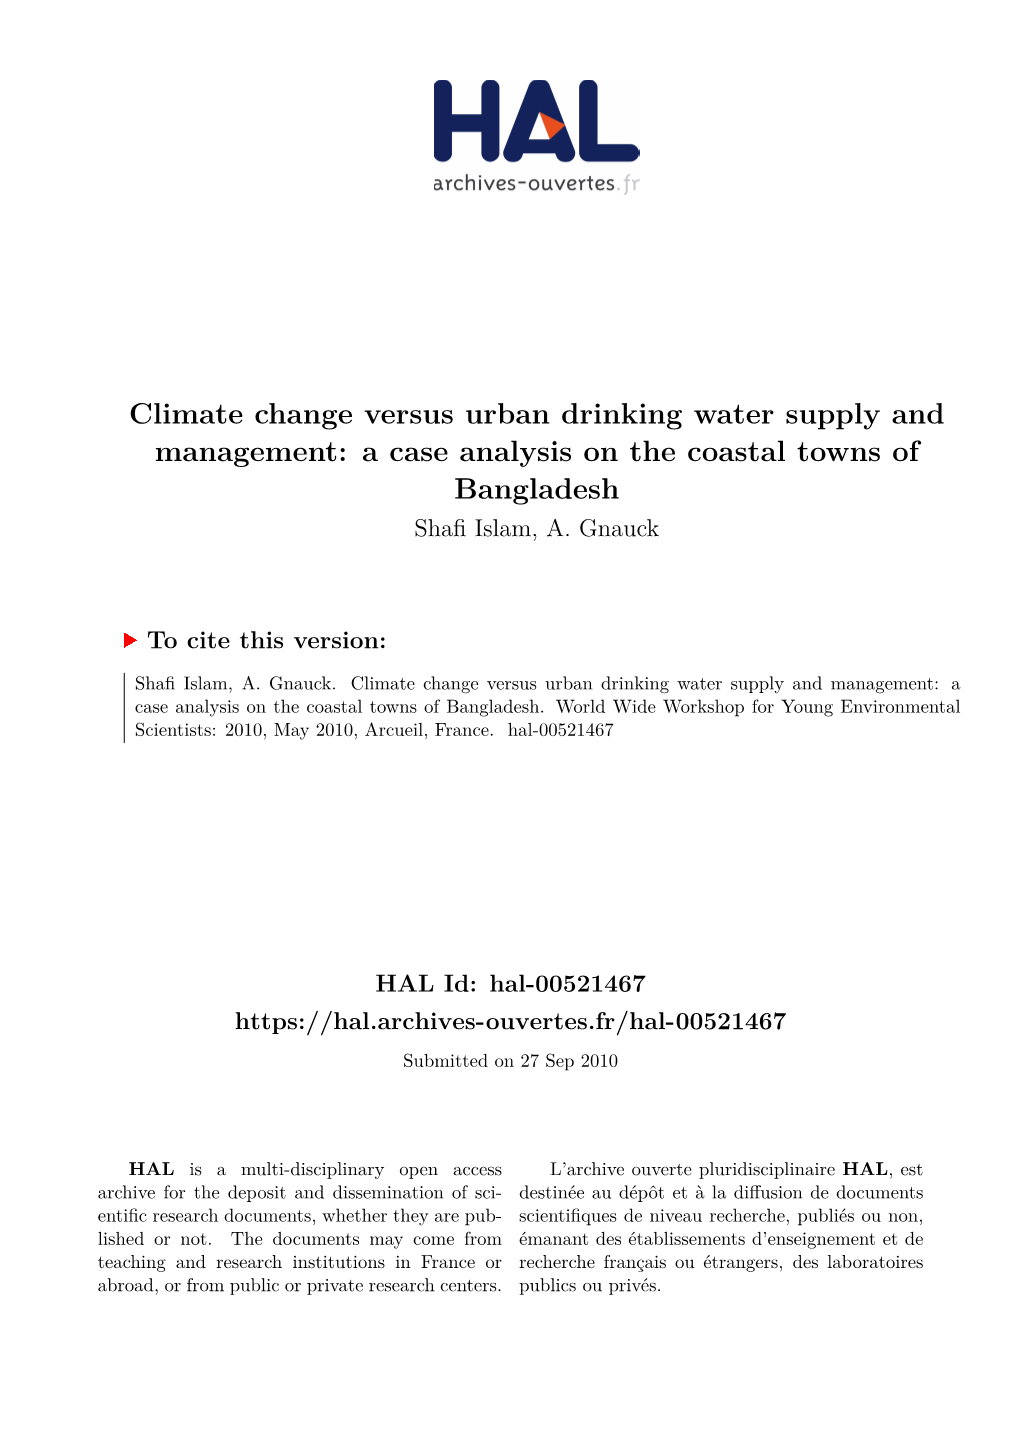 Climate Change Versus Urban Drinking Water Supply and Management: a Case Analysis on the Coastal Towns of Bangladesh Shafi Islam, A